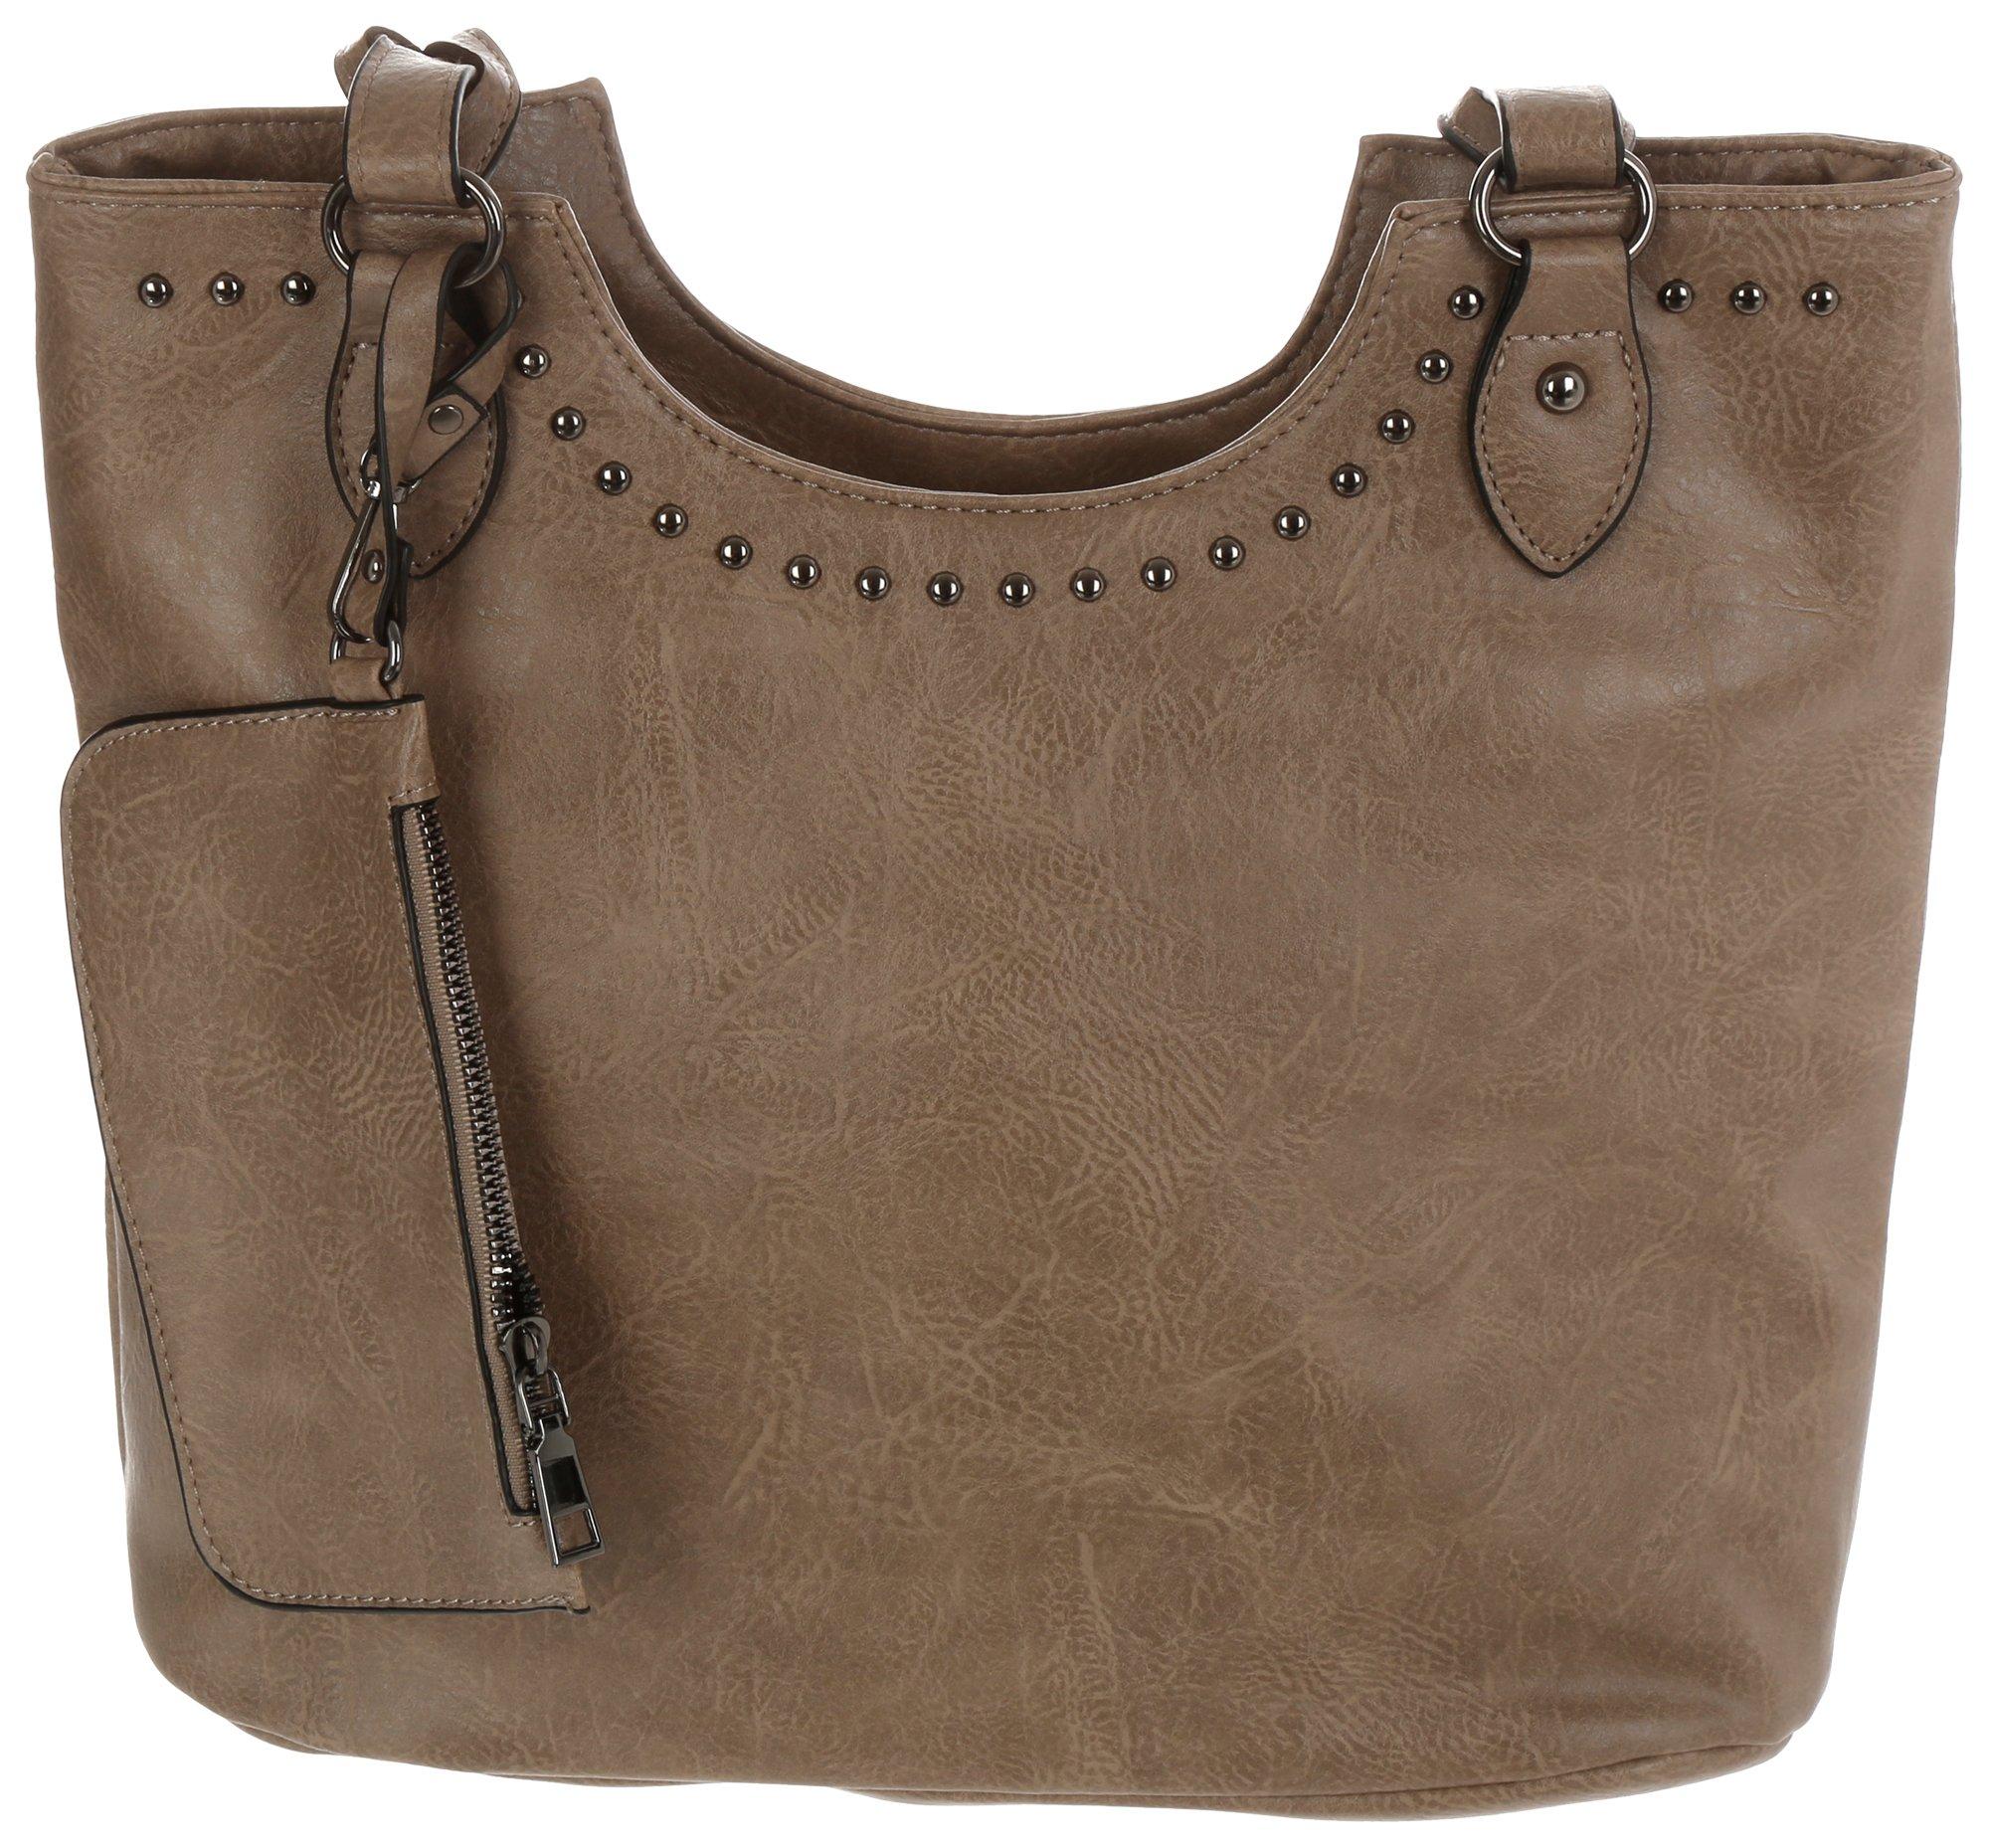 Faux Leather Studded Tote Bag